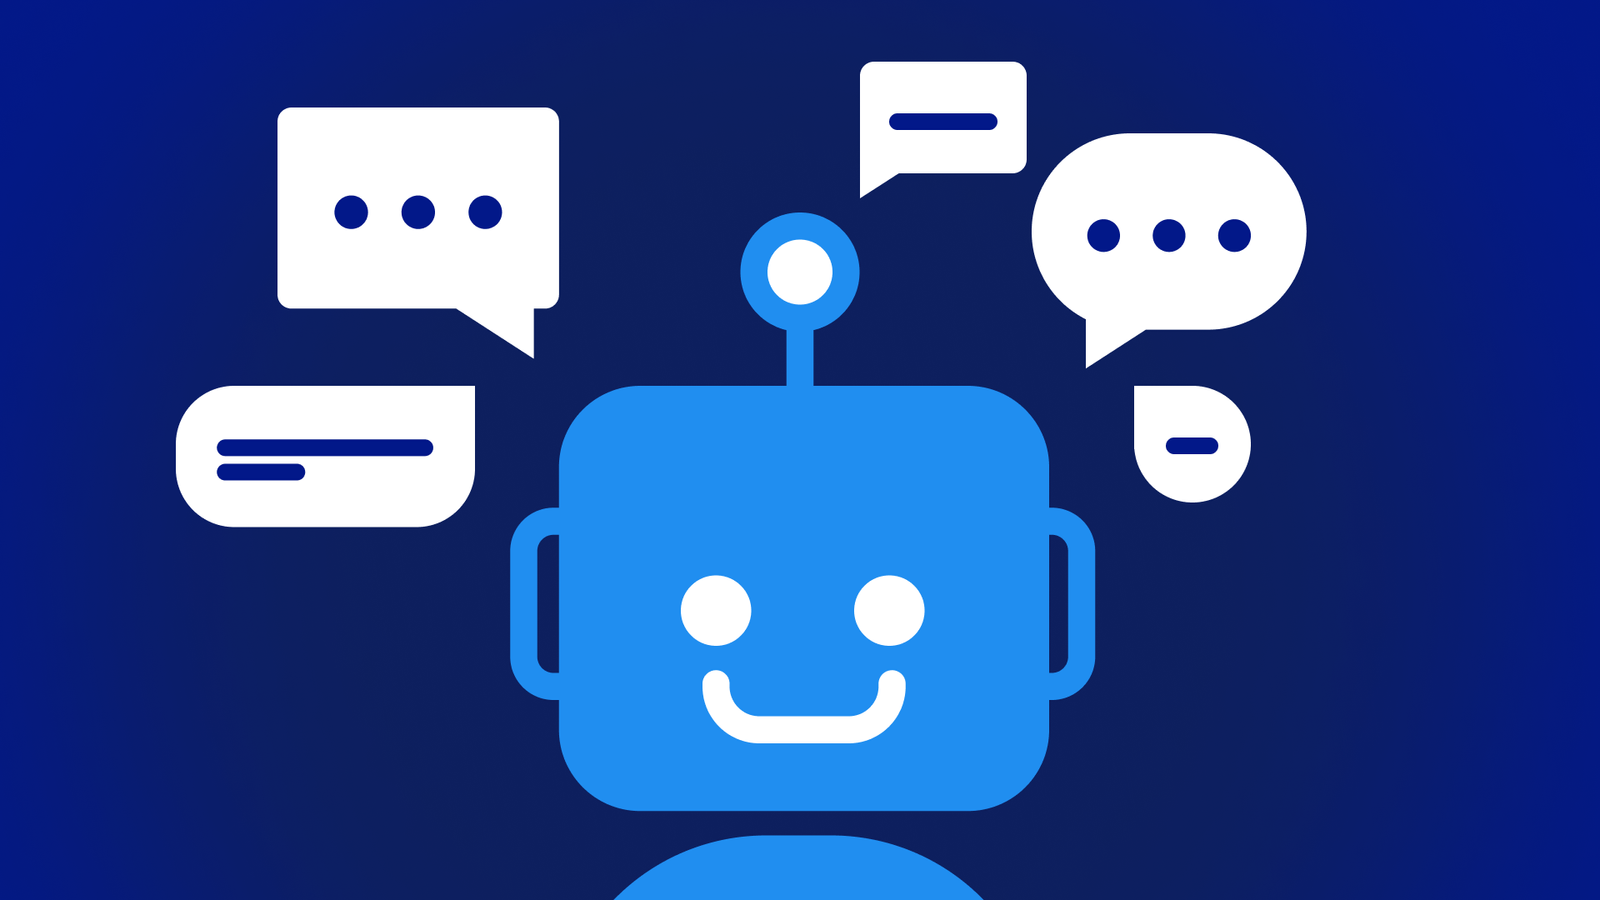 Chatbots and messaging apps